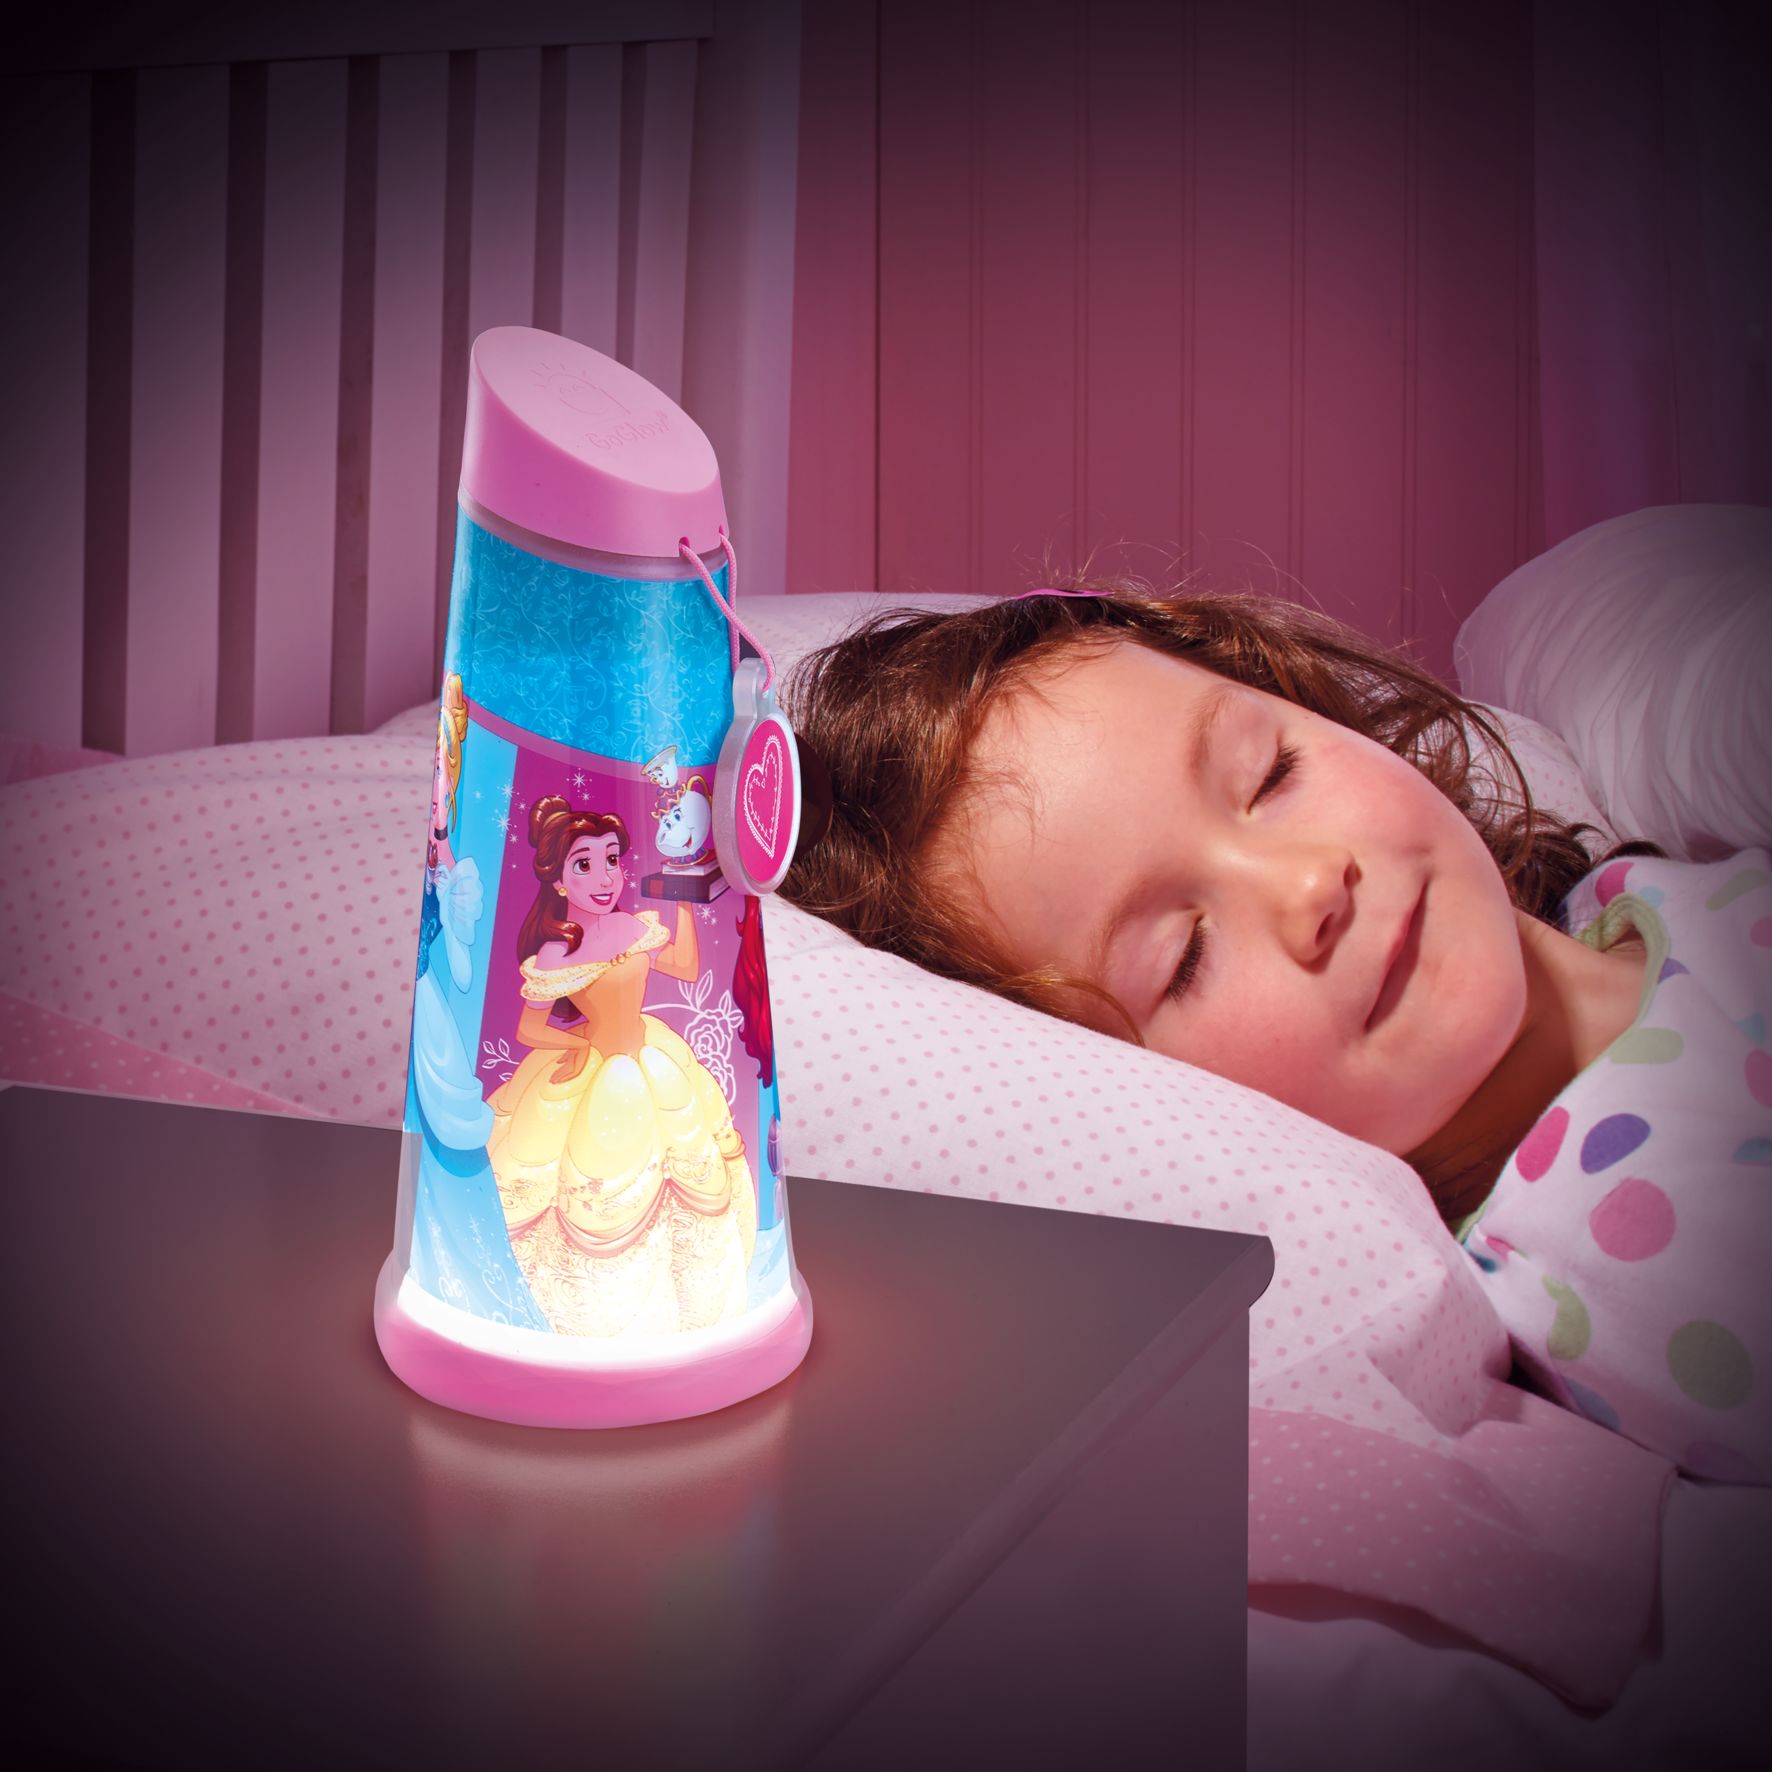 Disney Princess 2-in-1 Motion Activated Tilt Torch And Bedside Night Light